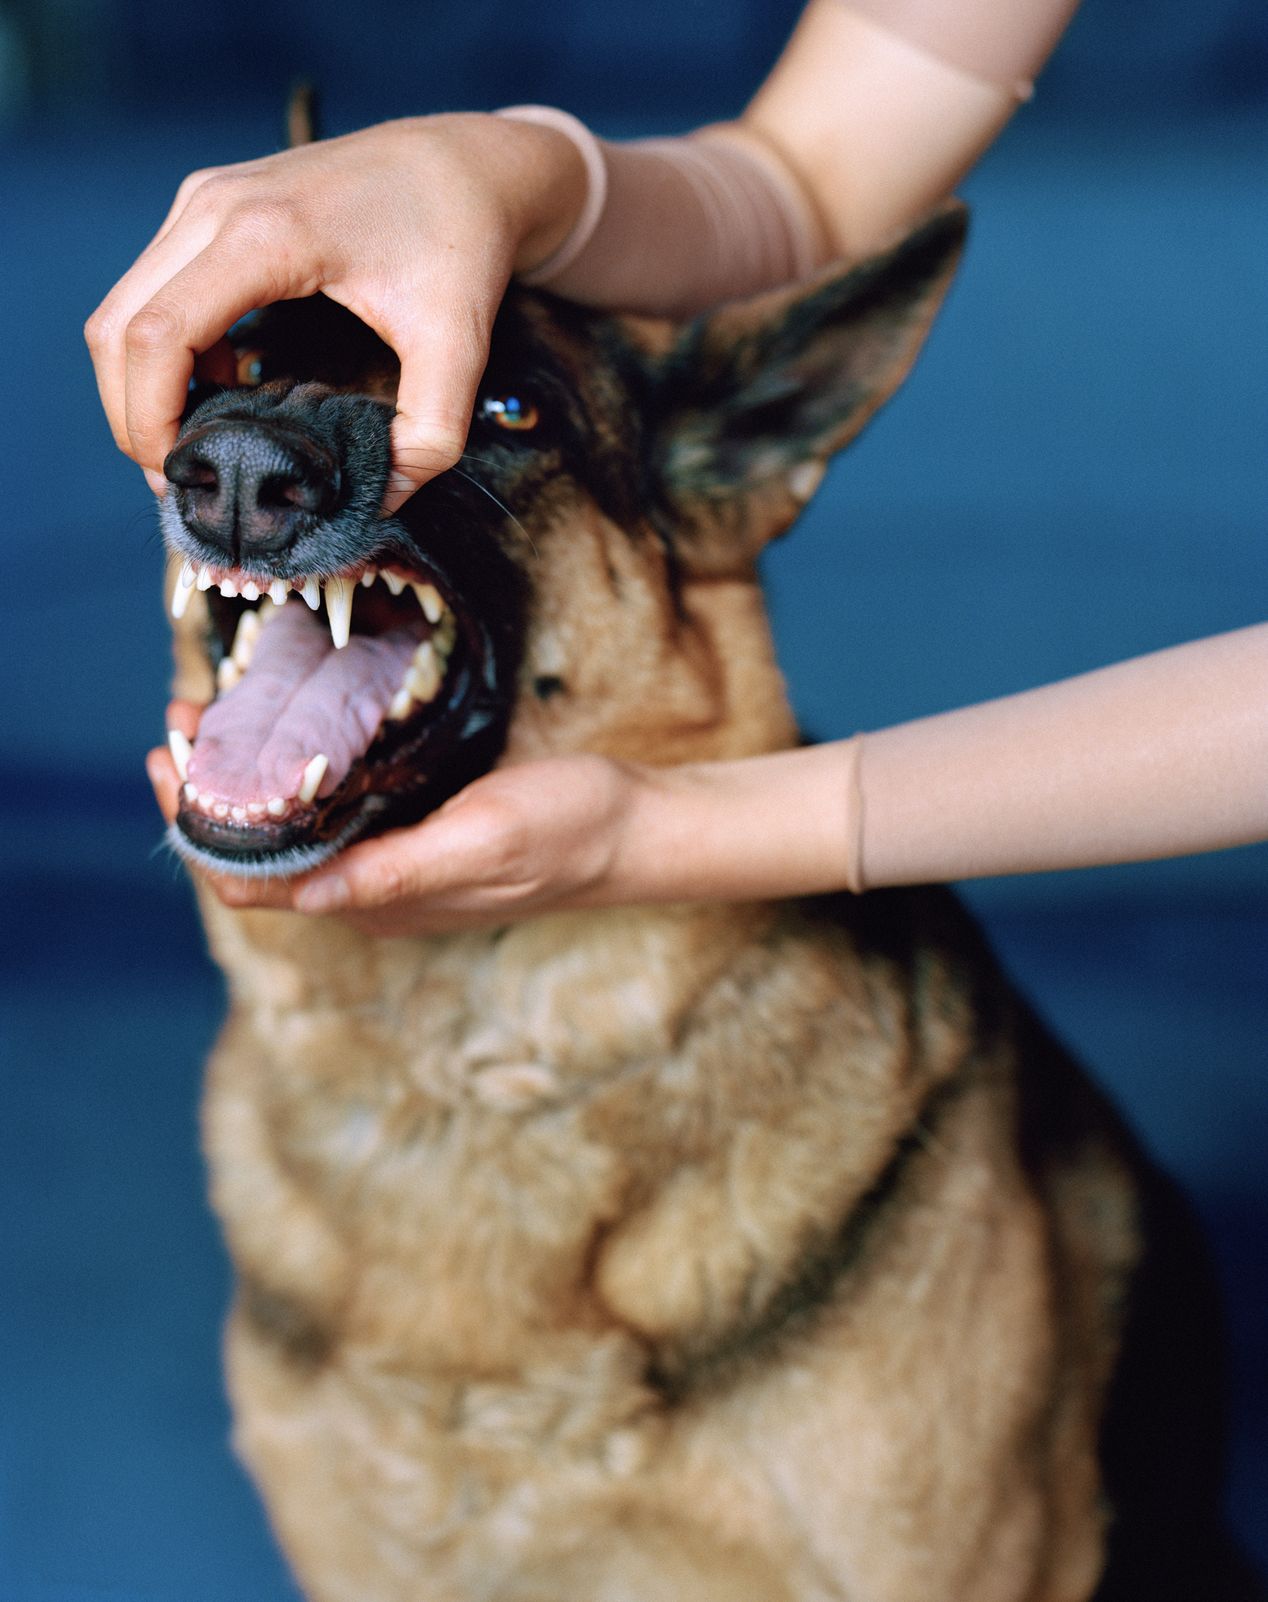 A pair of hands is holding a dog's mouth open, art photography, Ilona Szwarc, contemporary Los Angeles artist.